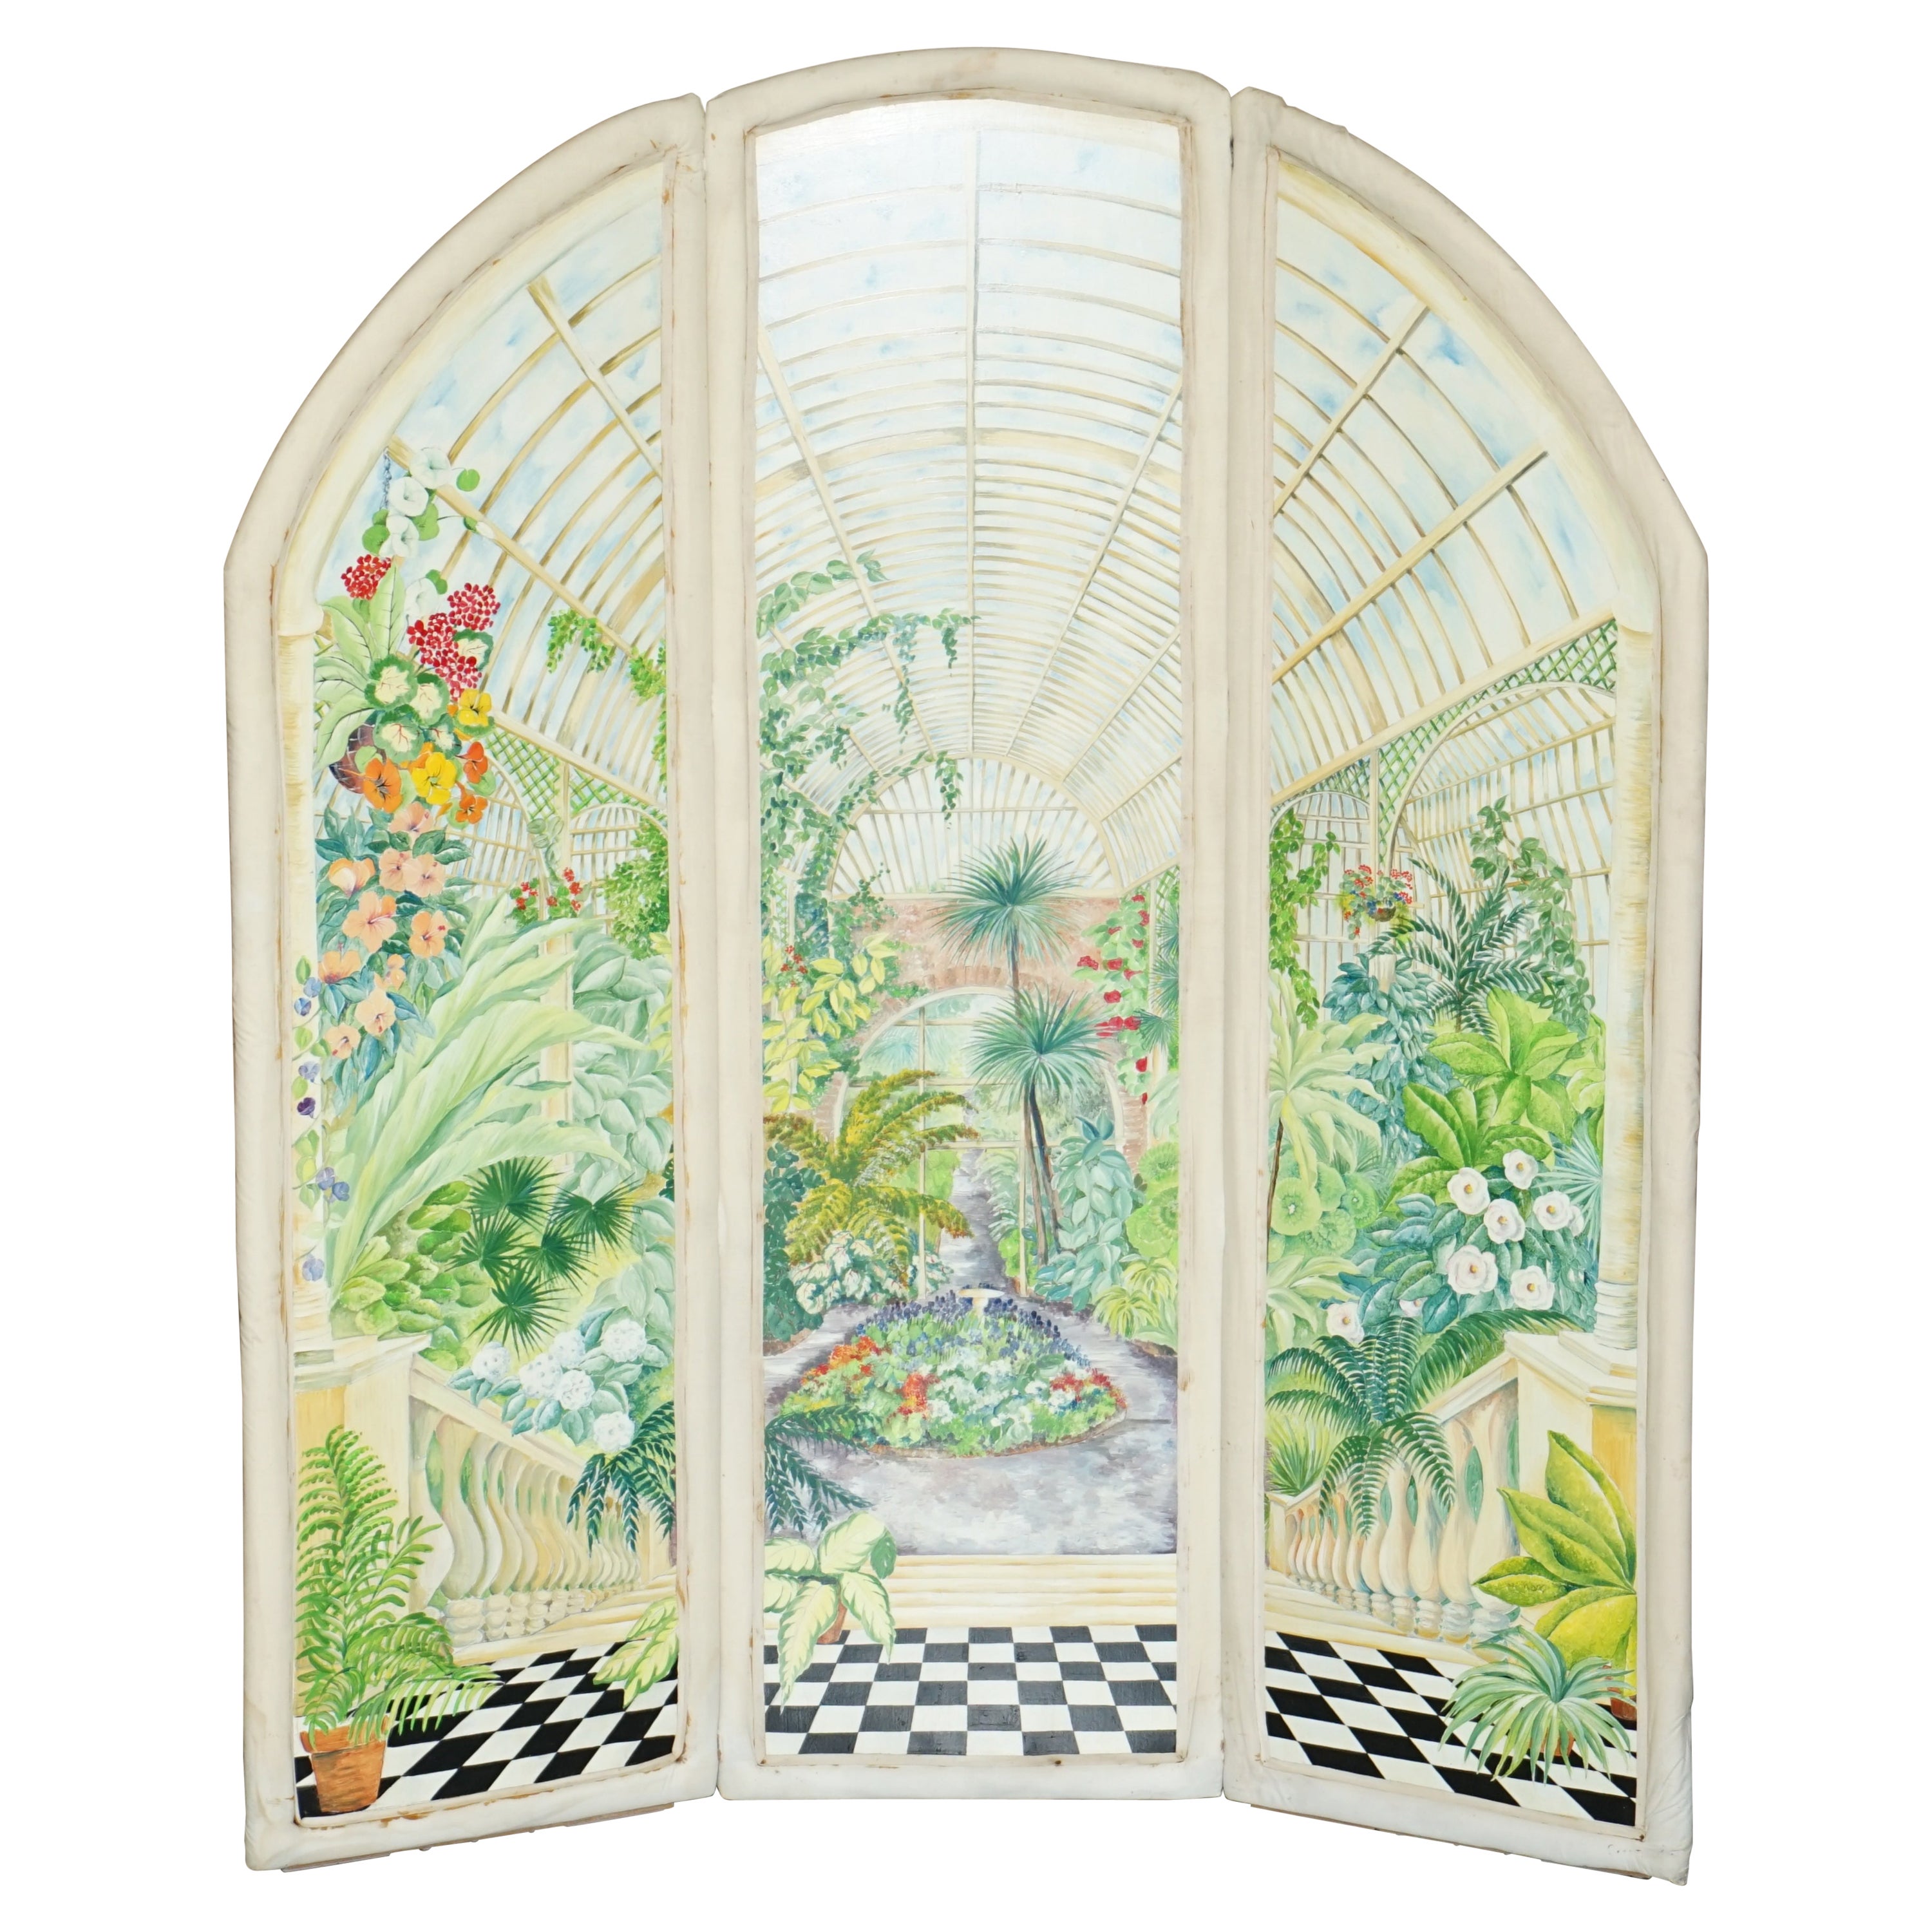 STUNNING VERY LARGE 1930's WATERCOLOR ROOM DIVIDER FOLDING SCREEN GARDEN SCENE For Sale